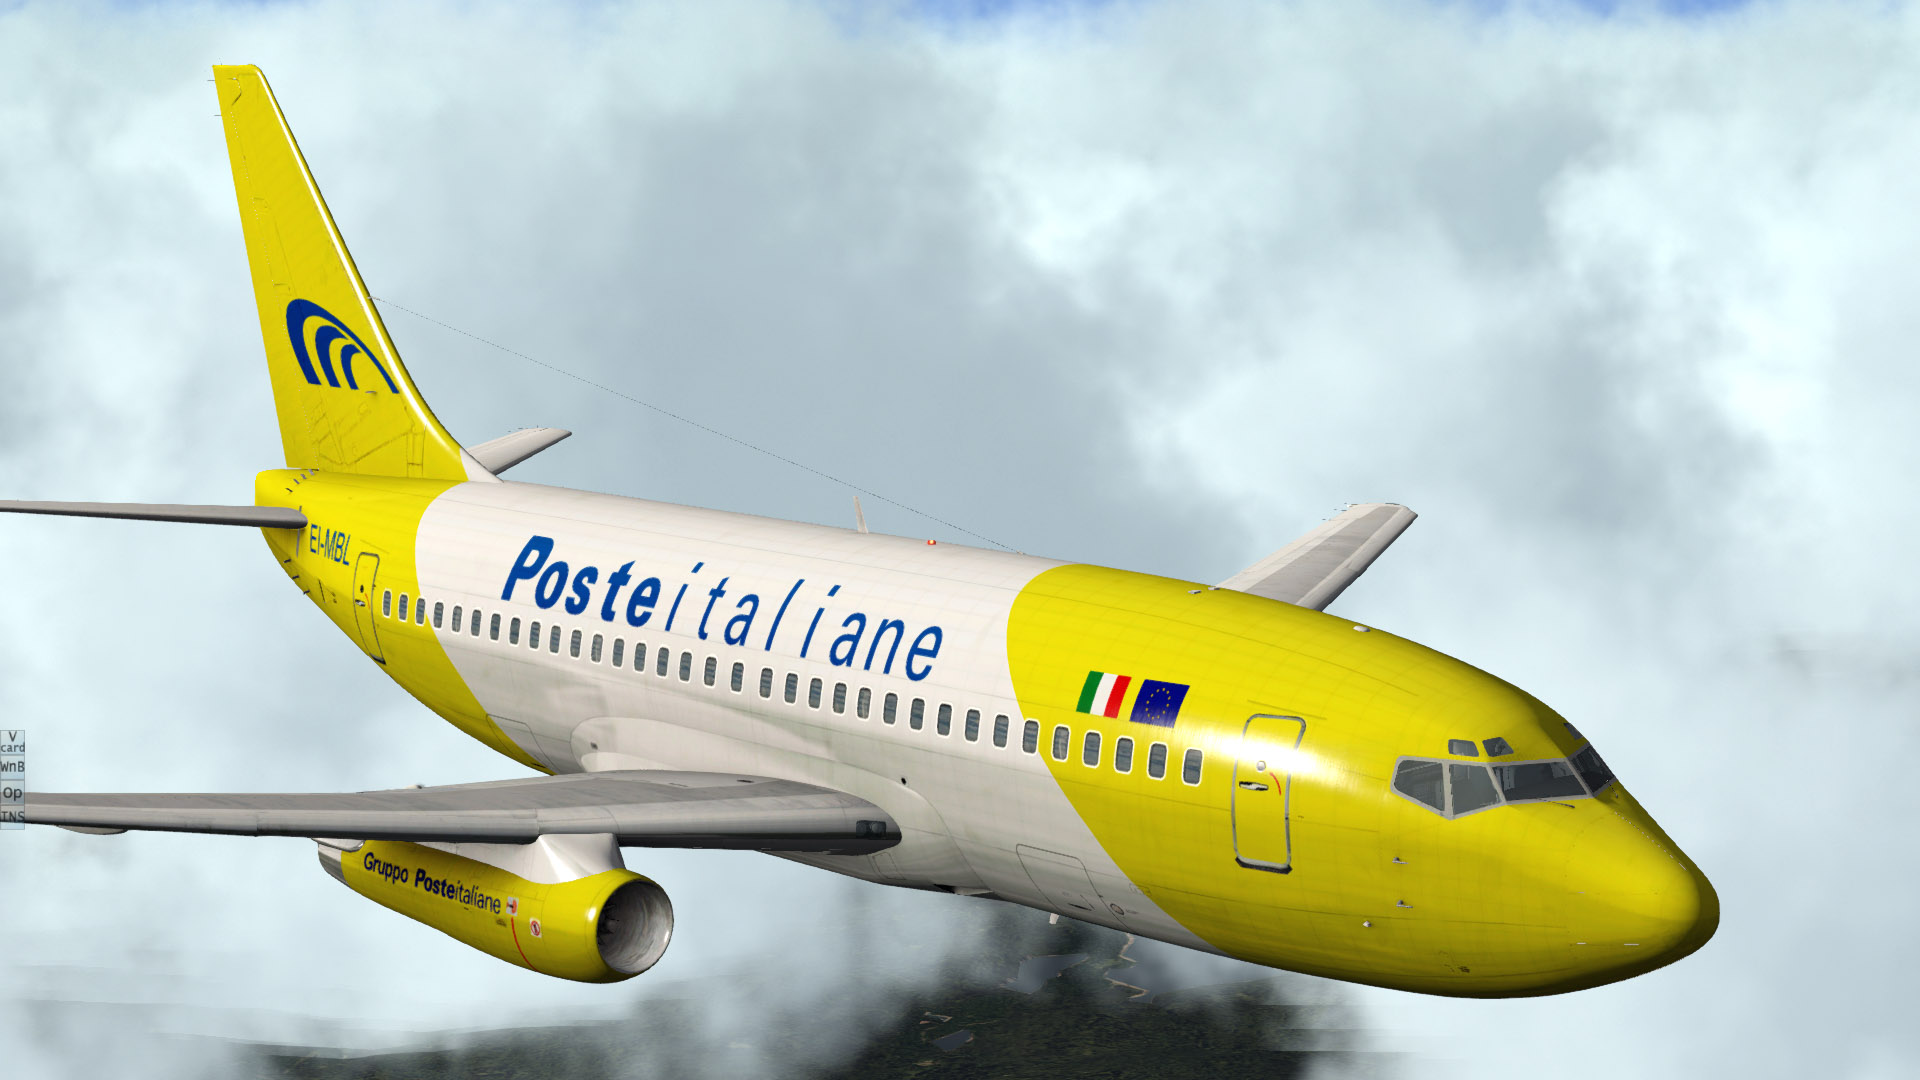 More information about "Poste Italiane - Boeing 737-200 TwinJet"